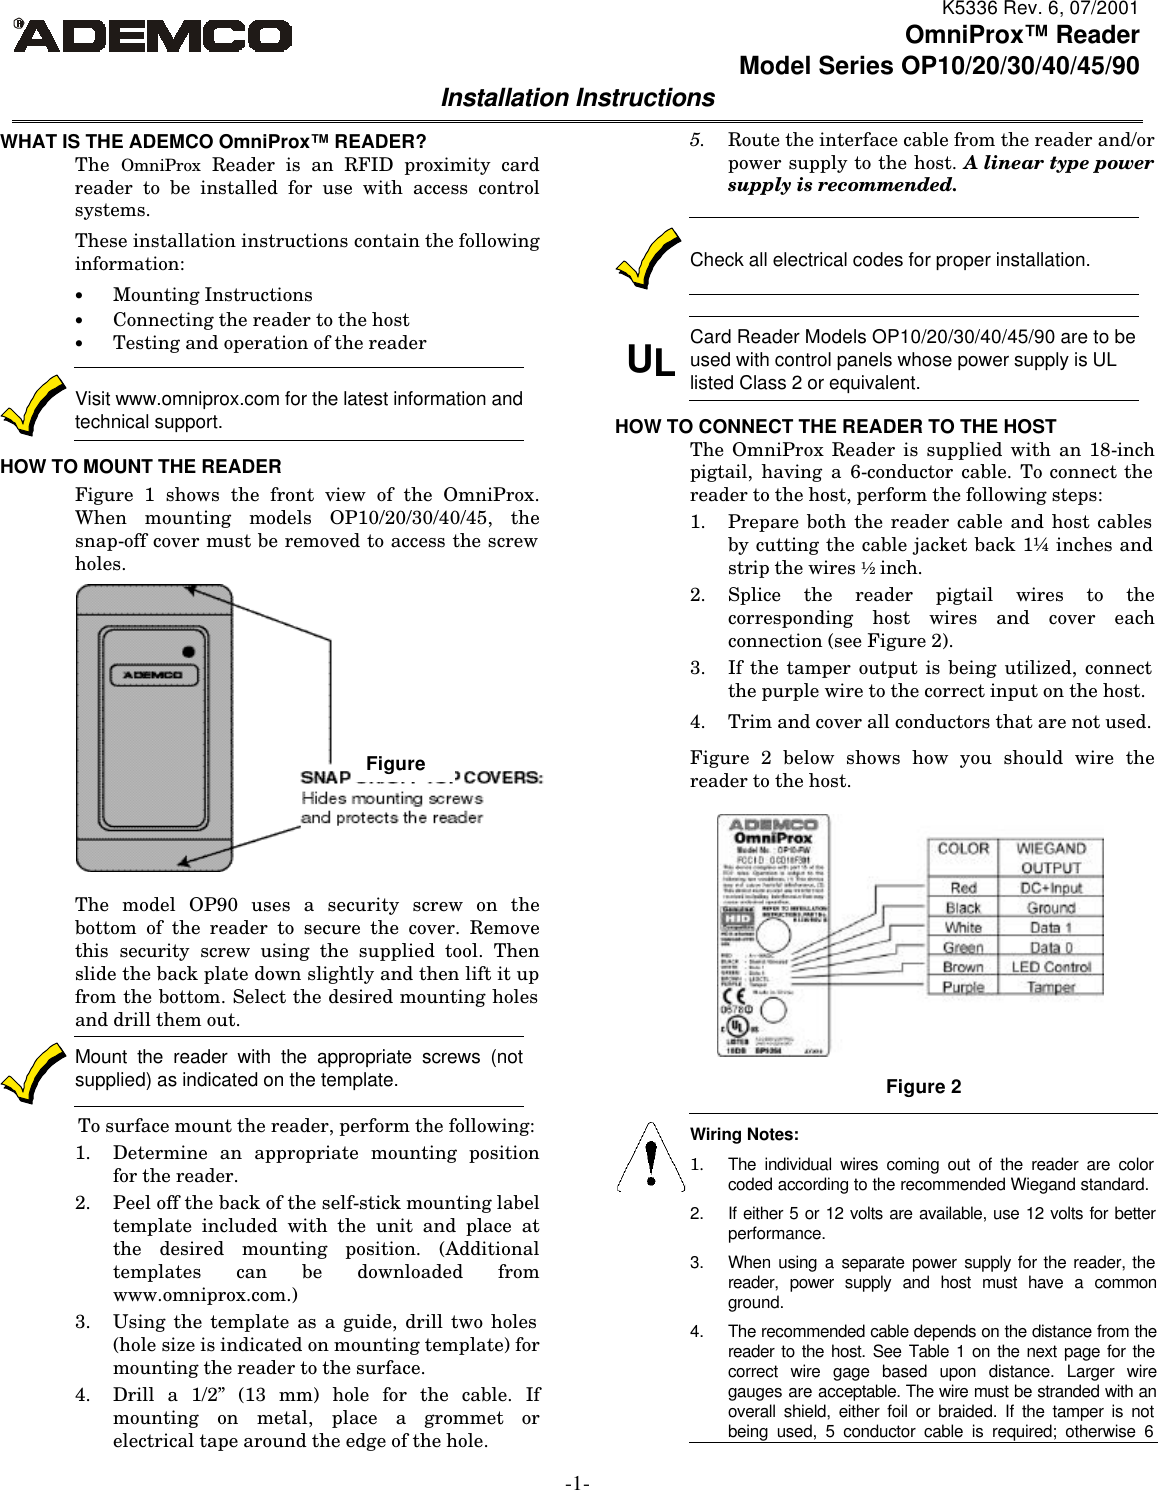 K5336 Rev. 6, 07/2001 -1- OmniProx™ Reader Model Series OP10/20/30/40/45/90  Installation Instructions  WHAT IS THE ADEMCO OmniProx™ READER? The OmniProx Reader is an RFID proximity card reader to be installed for use with access control systems. These installation instructions contain the following  information: • Mounting Instructions • Connecting the reader to the host  • Testing and operation of the reader  Visit www.omniprox.com for the latest information and technical support. HOW TO MOUNT THE READER Figure 1 shows the front view of the OmniProx.  When mounting models OP10/20/30/40/45, the snap-off cover must be removed to access the screw holes.  The model OP90 uses a security screw on the bottom of the reader to secure the cover. Remove this security screw using the supplied tool. Then slide the back plate down slightly and then lift it up from the bottom. Select the desired mounting holes and drill them out.  Mount the reader with the appropriate screws (not supplied) as indicated on the template. To surface mount the reader, perform the following: 1. Determine an appropriate mounting position for the reader. 2. Peel off the back of the self-stick mounting label template included with the unit and place at the desired mounting position. (Additional templates can be downloaded from www.omniprox.com.) 3. Using the template as a guide, drill two holes (hole size is indicated on mounting template) for mounting the reader to the surface. 4. Drill a 1/2” (13 mm) hole for the cable. If mounting on metal, place a grommet or electrical tape around the edge of the hole. 5. Route the interface cable from the reader and/or power supply to the host. A linear type power supply is recommended.   Check all electrical codes for proper installation.   UL Card Reader Models OP10/20/30/40/45/90 are to be used with control panels whose power supply is UL listed Class 2 or equivalent.  HOW TO CONNECT THE READER TO THE HOST The OmniProx Reader is supplied with an 18-inch pigtail, having a 6-conductor cable. To connect the reader to the host, perform the following steps: 1. Prepare both the reader cable and host cables by cutting the cable jacket back 1¼ inches and strip the wires ½ inch. 2. Splice the reader pigtail wires to the corresponding host wires and cover each connection (see Figure 2). 3. If the tamper output is being utilized, connect the purple wire to the correct input on the host. 4. Trim and cover all conductors that are not used. Figure 2 below shows how you should wire the reader to the host.         Wiring Notes: 1. The individual wires coming out of the reader are color coded according to the recommended Wiegand standard. 2. If either 5 or 12 volts are available, use 12 volts for better performance. 3. When using a separate power supply for the reader, the reader, power supply and host must have a common ground. 4. The recommended cable depends on the distance from the reader to the host. See Table 1 on the next page for the correct wire gage based upon distance. Larger wire gauges are acceptable. The wire must be stranded with an overall shield, either foil or braided. If the tamper is not being used, 5 conductor cable is required; otherwise 6 Figure 2 Figure 